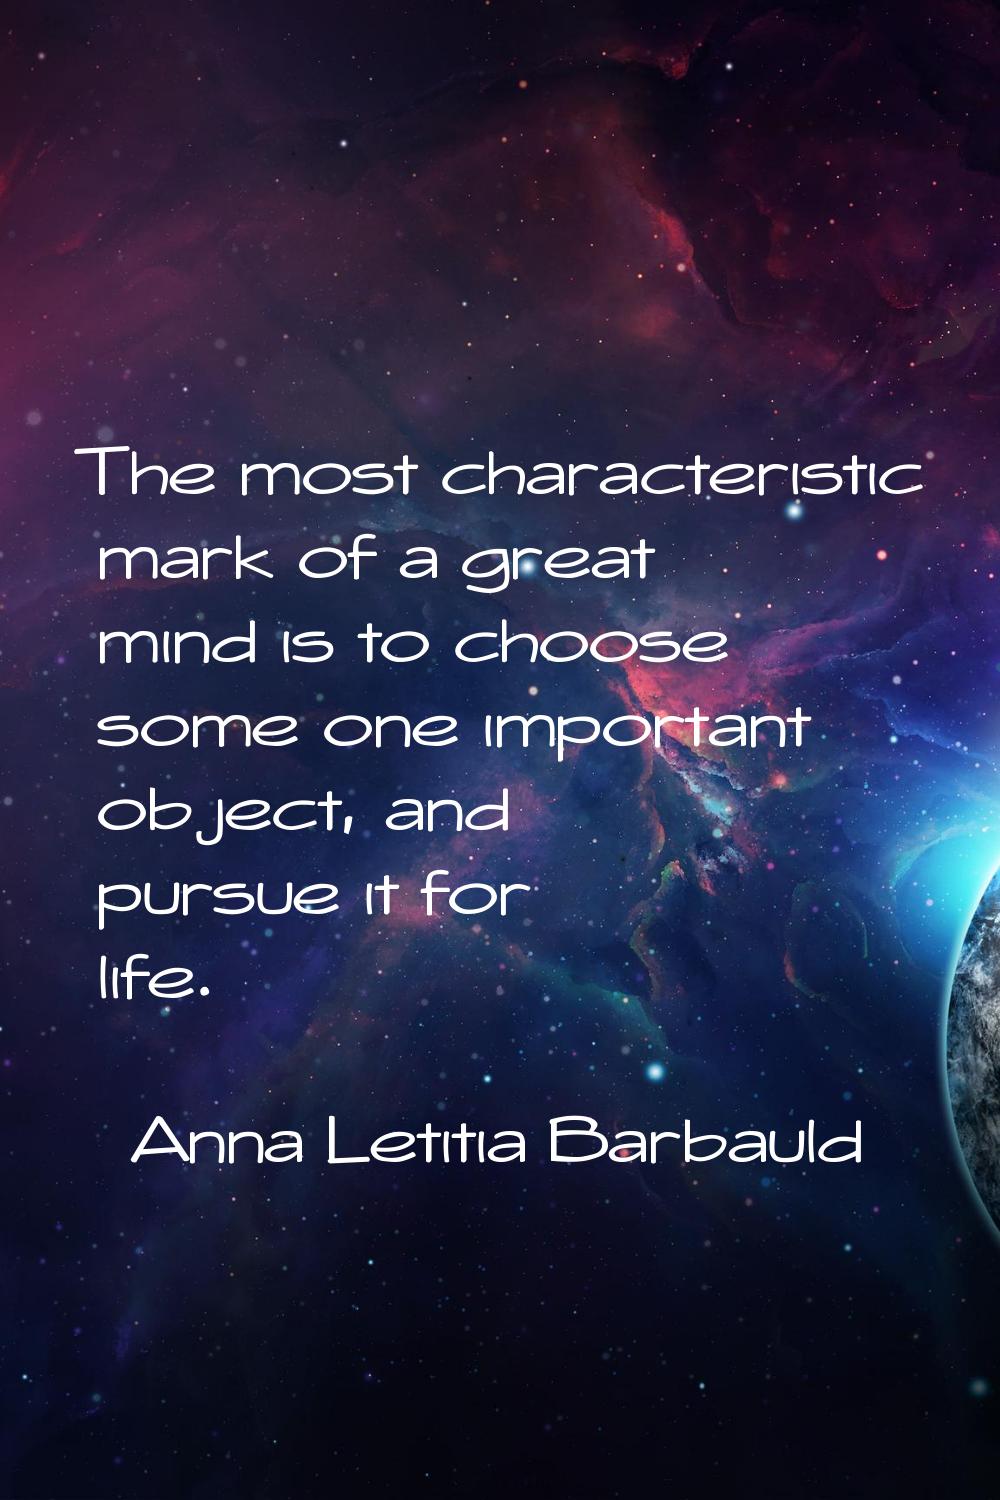 The most characteristic mark of a great mind is to choose some one important object, and pursue it 